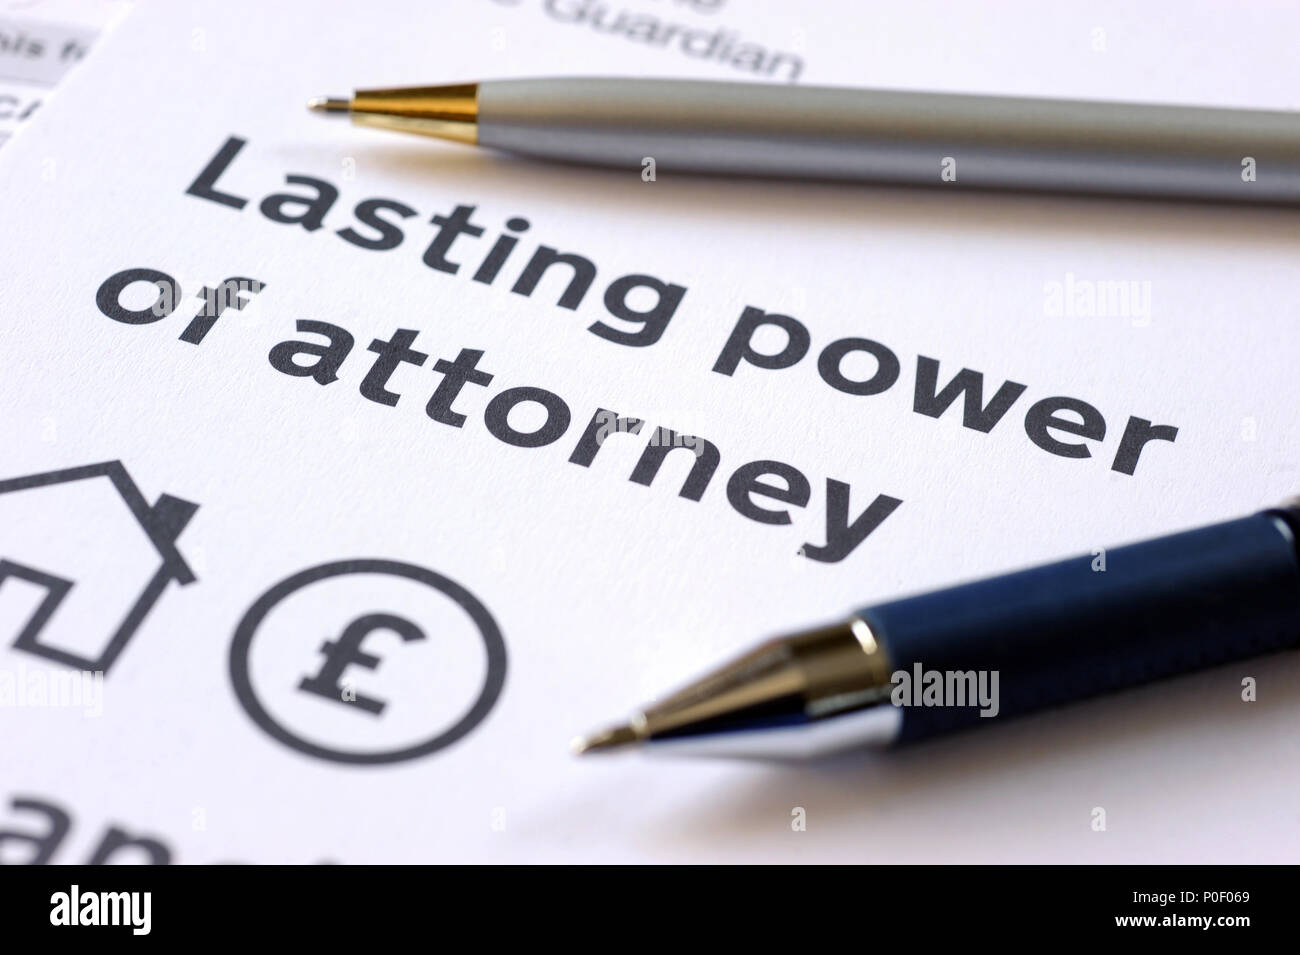 LASTING POWER OF ATTORNEY FORMS WITH PENS RE OFFICE OF THE PUBLIC GUARDIAN DEATH WILLS MAKING A WILL FAMILY UK Stock Photo